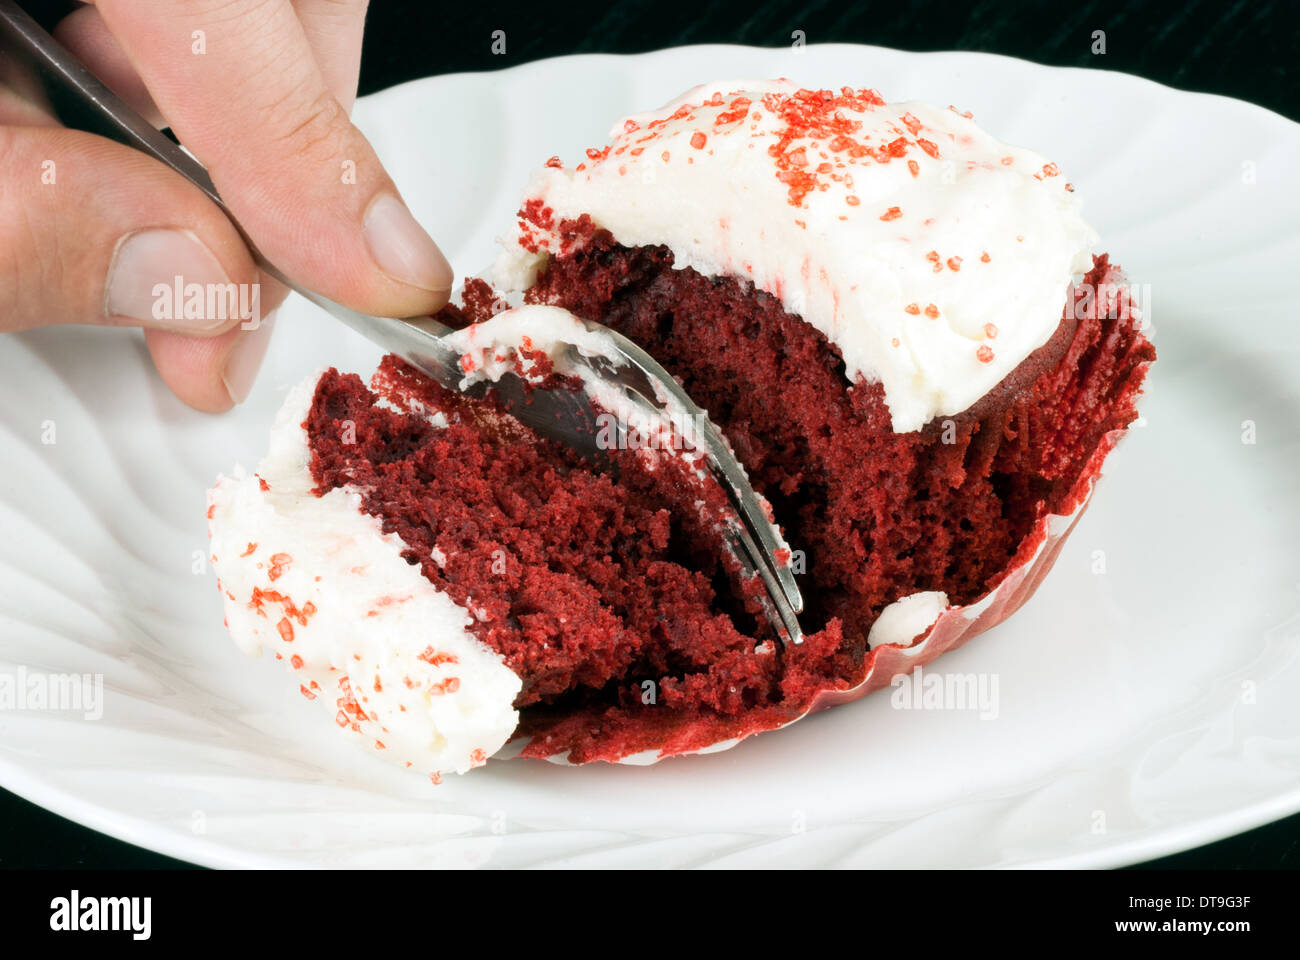 Close-up of a red velvet cupcake on a plate with a man's hand holding a fork slicing into it. Stock Photo